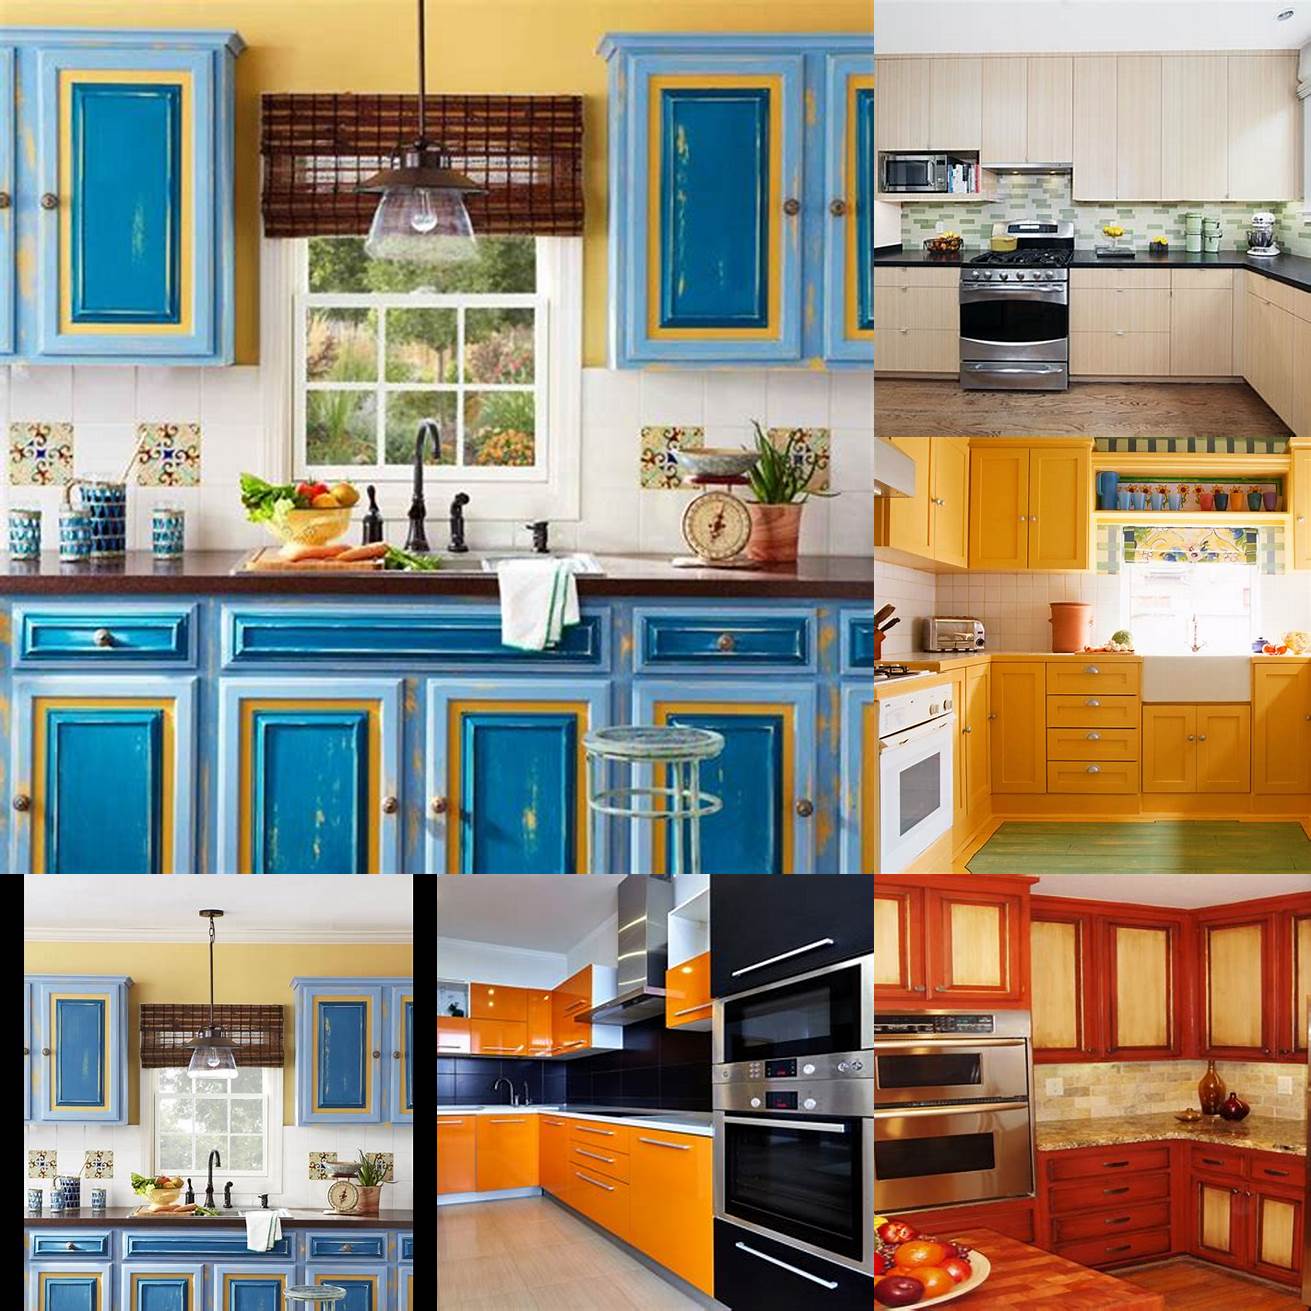 Kitchen doors with a colorful finish